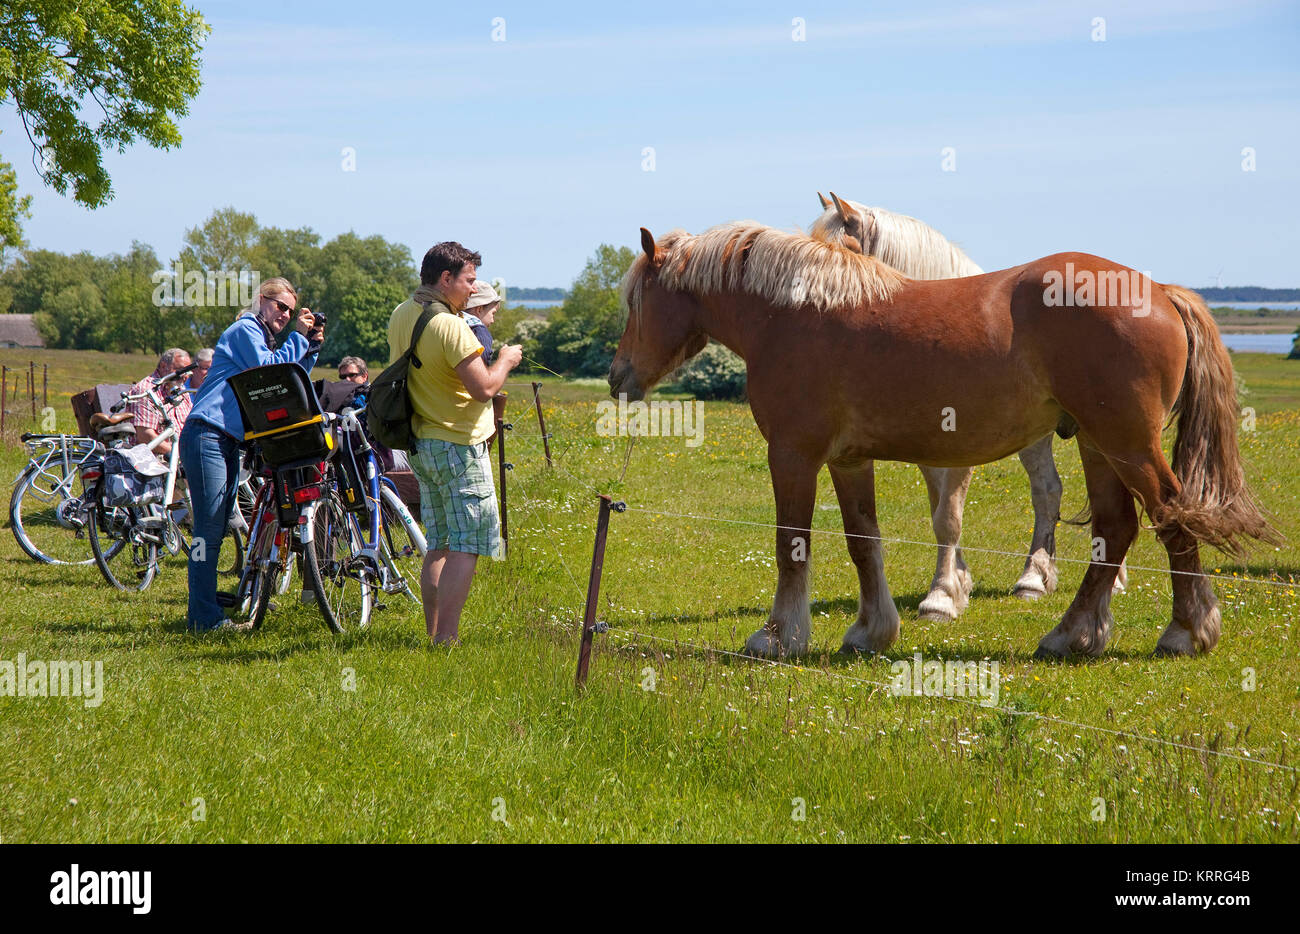 Tourists at horses on field, Hiddensee, National park 'Vorpommersche National park', Mecklenburg-Western Pomerania, Baltic Sea, Germany, Europe Stock Photo